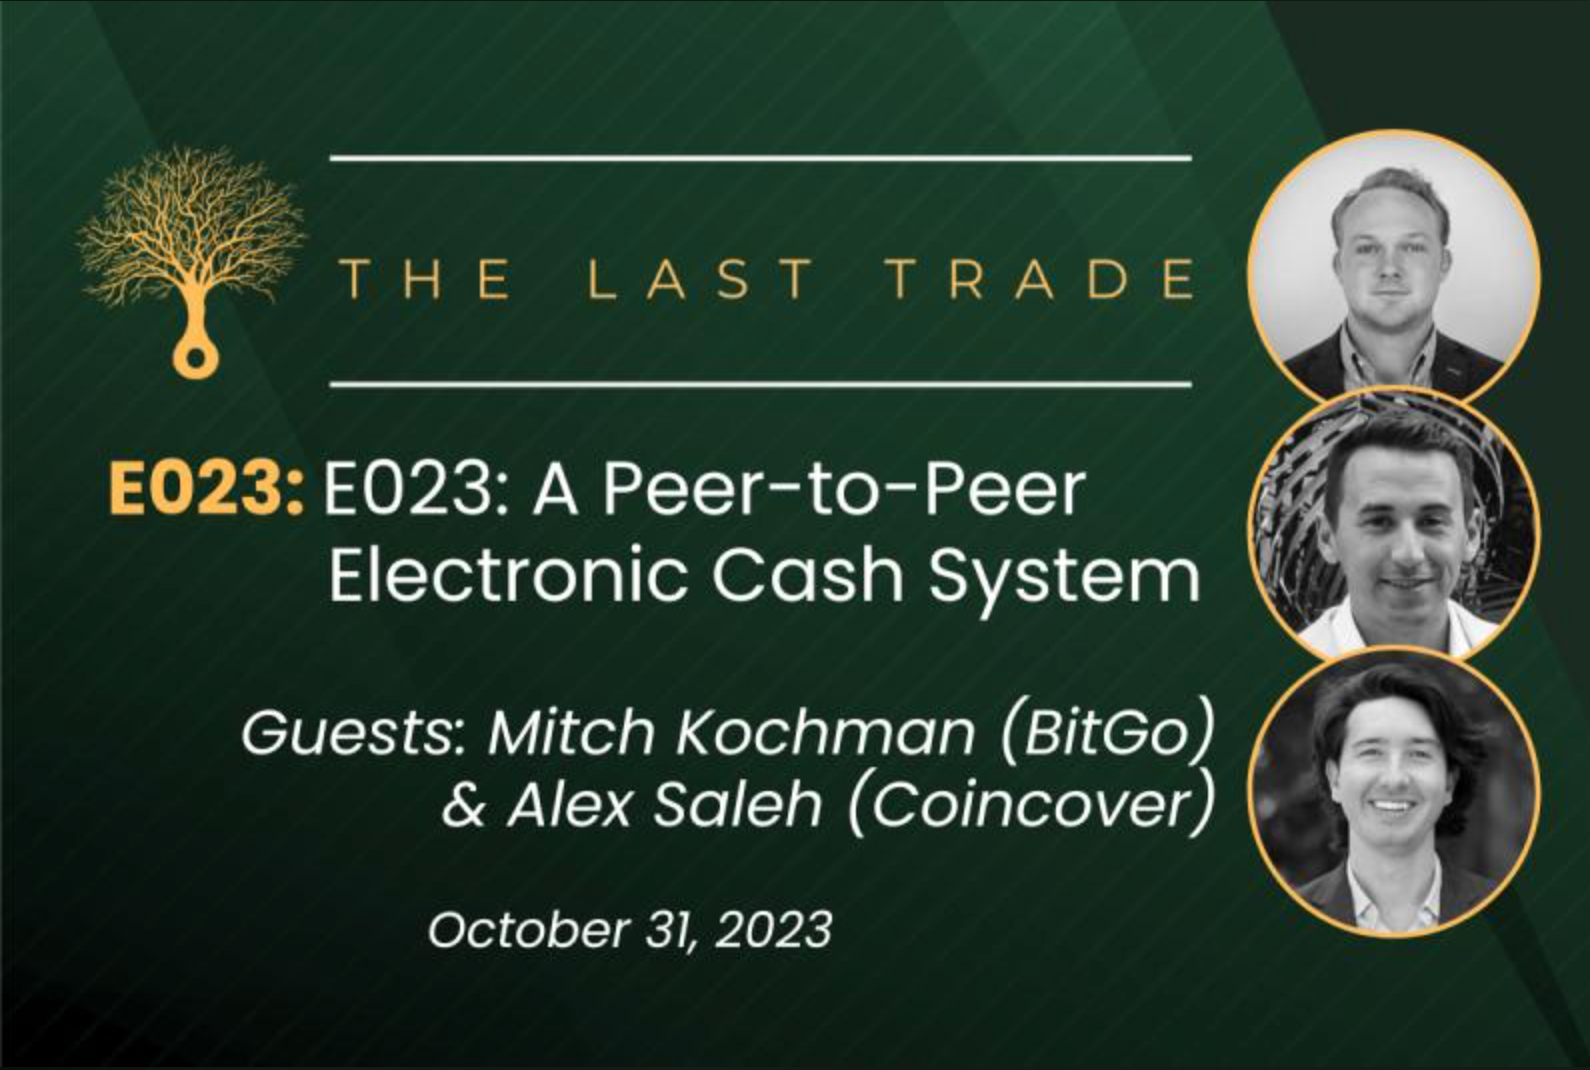 E023: A Peer-to-Peer Electronic Cash System with BitGo & Coincover